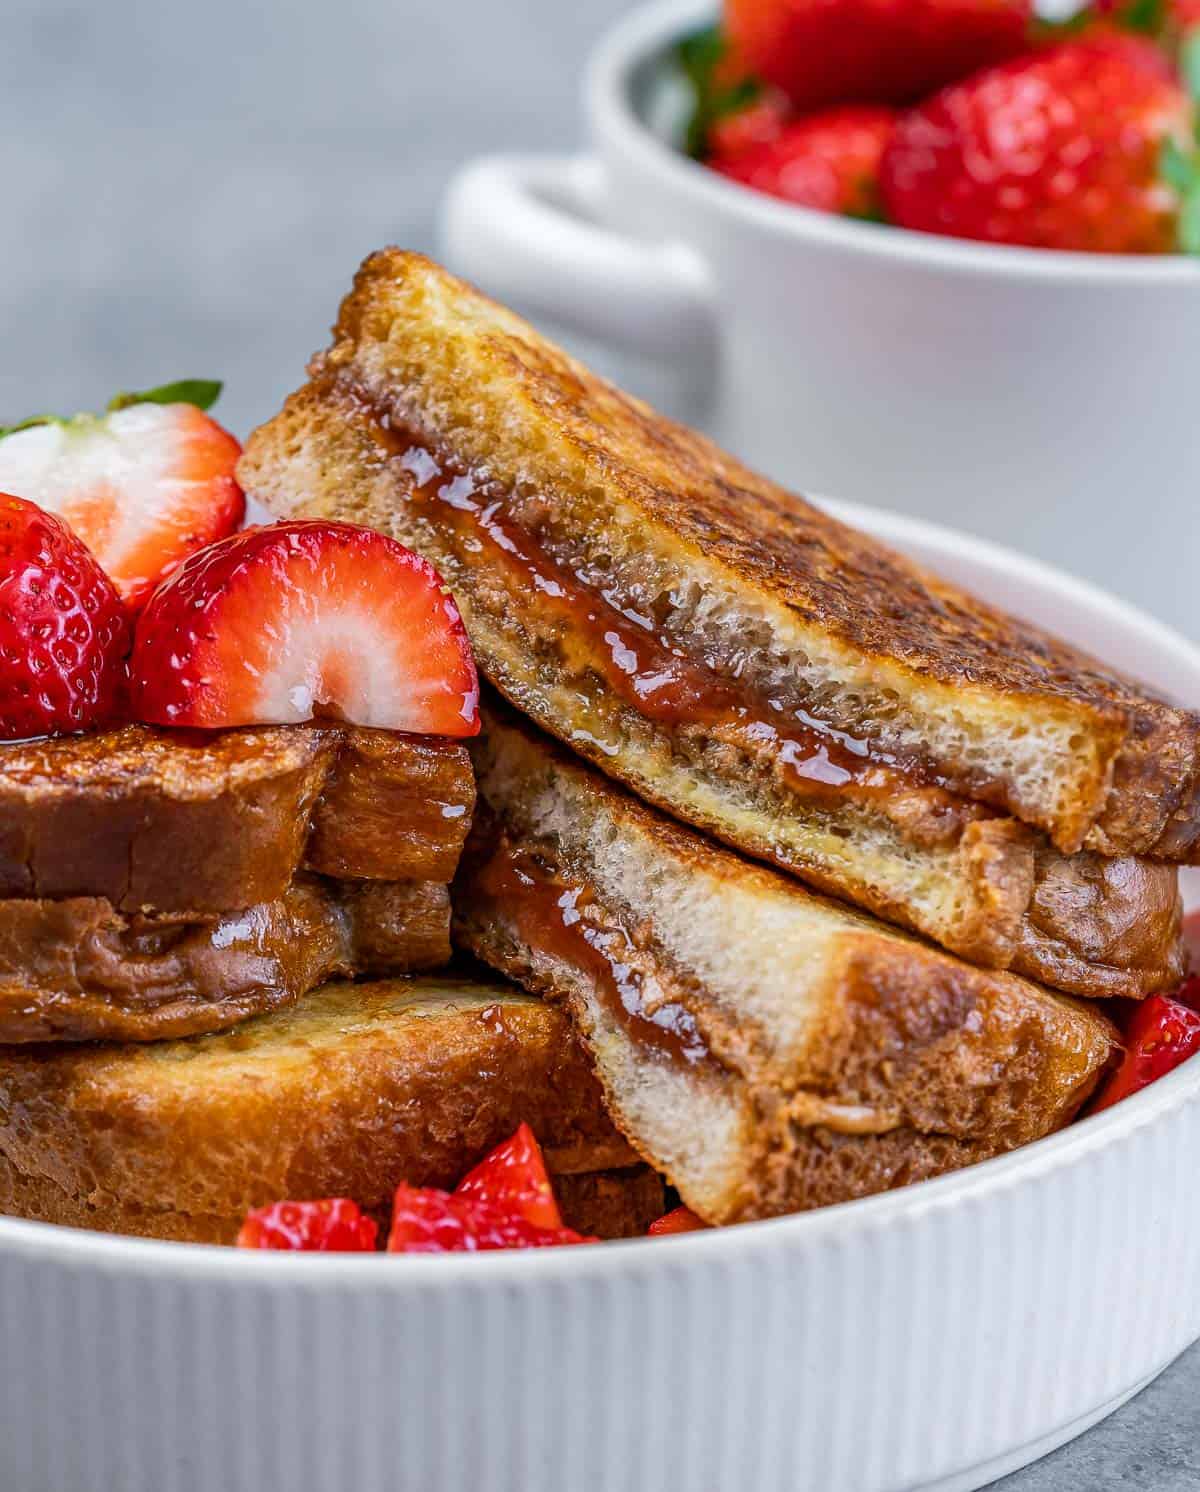 Stuffed French toast served with fresh strawberries.